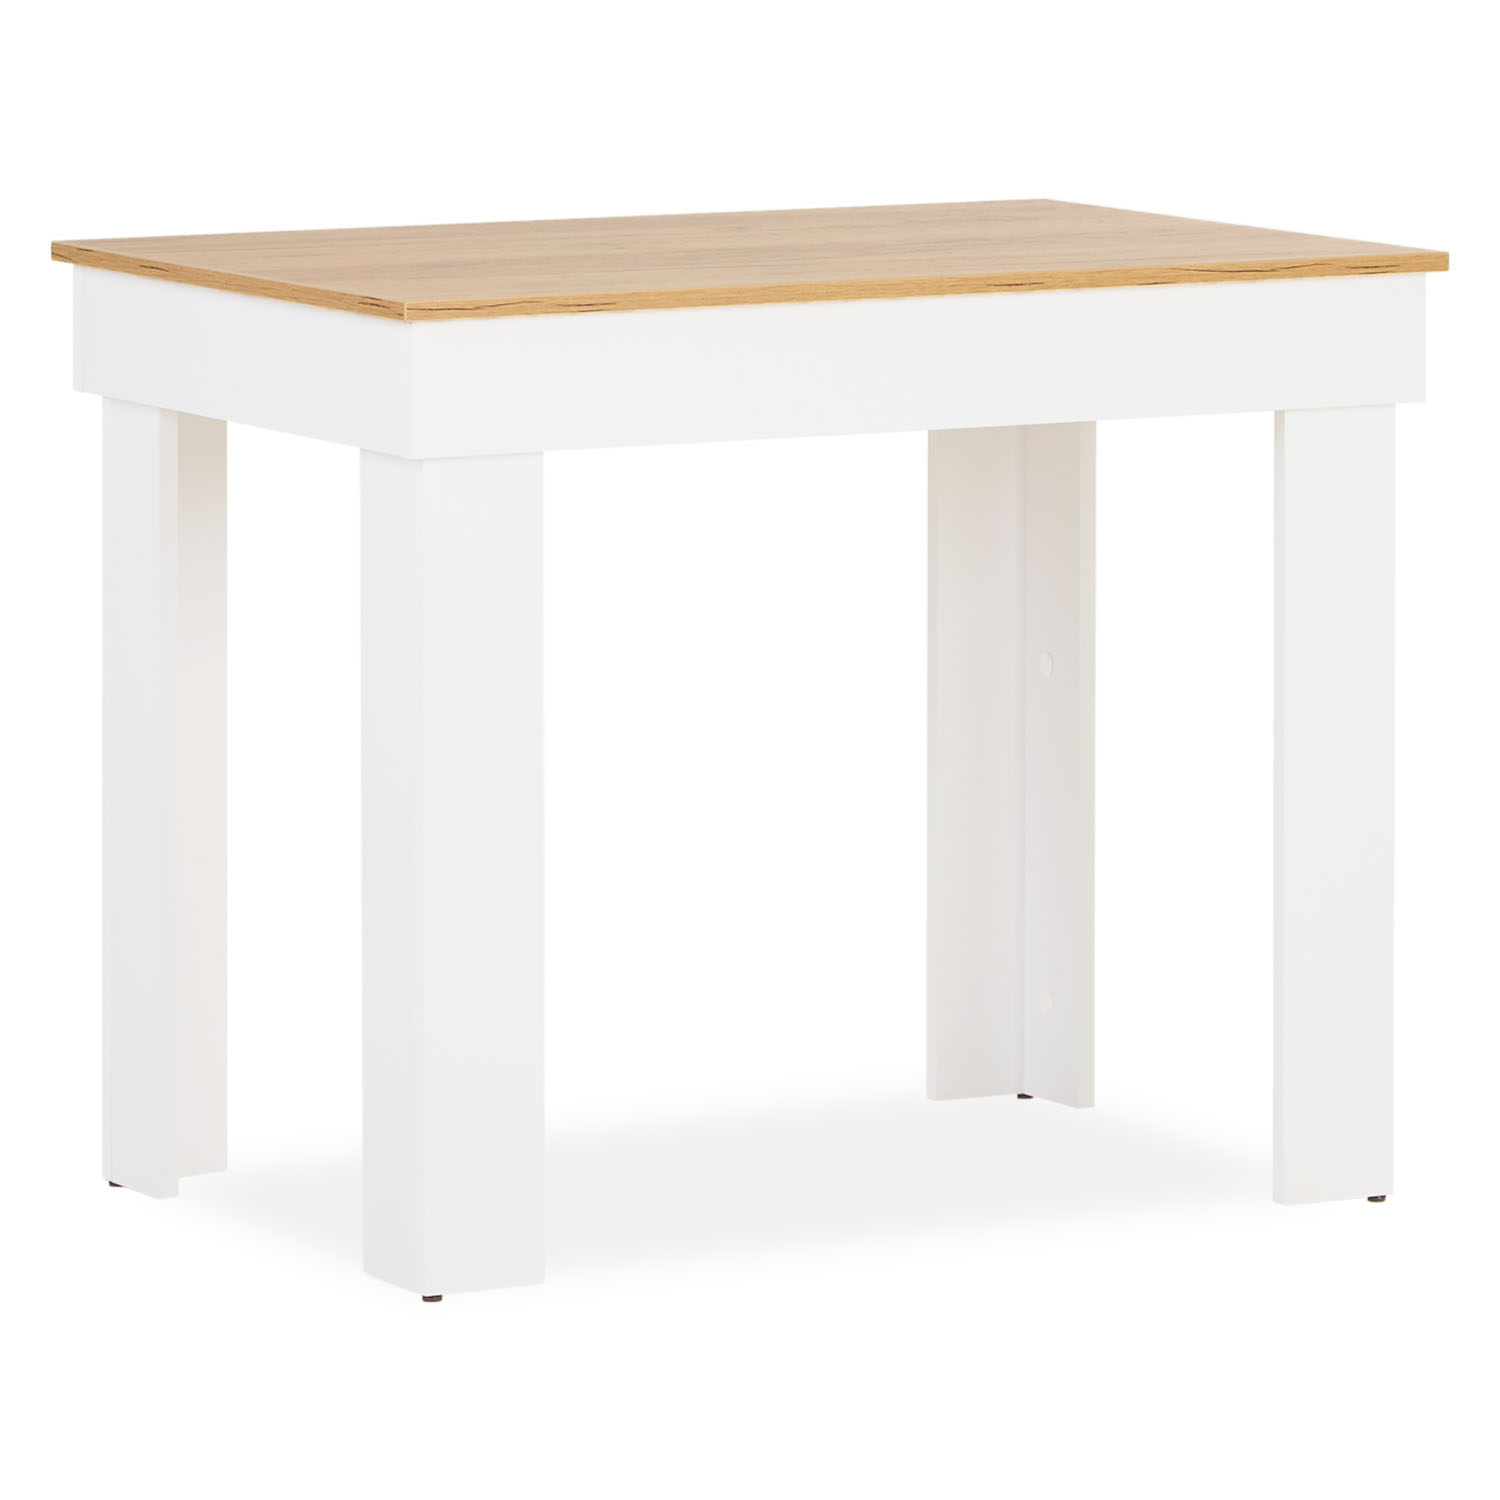 Modern Dining Table Kitchen Table Wooden Table 90x60 cm White 2 Seater Living Room Oak